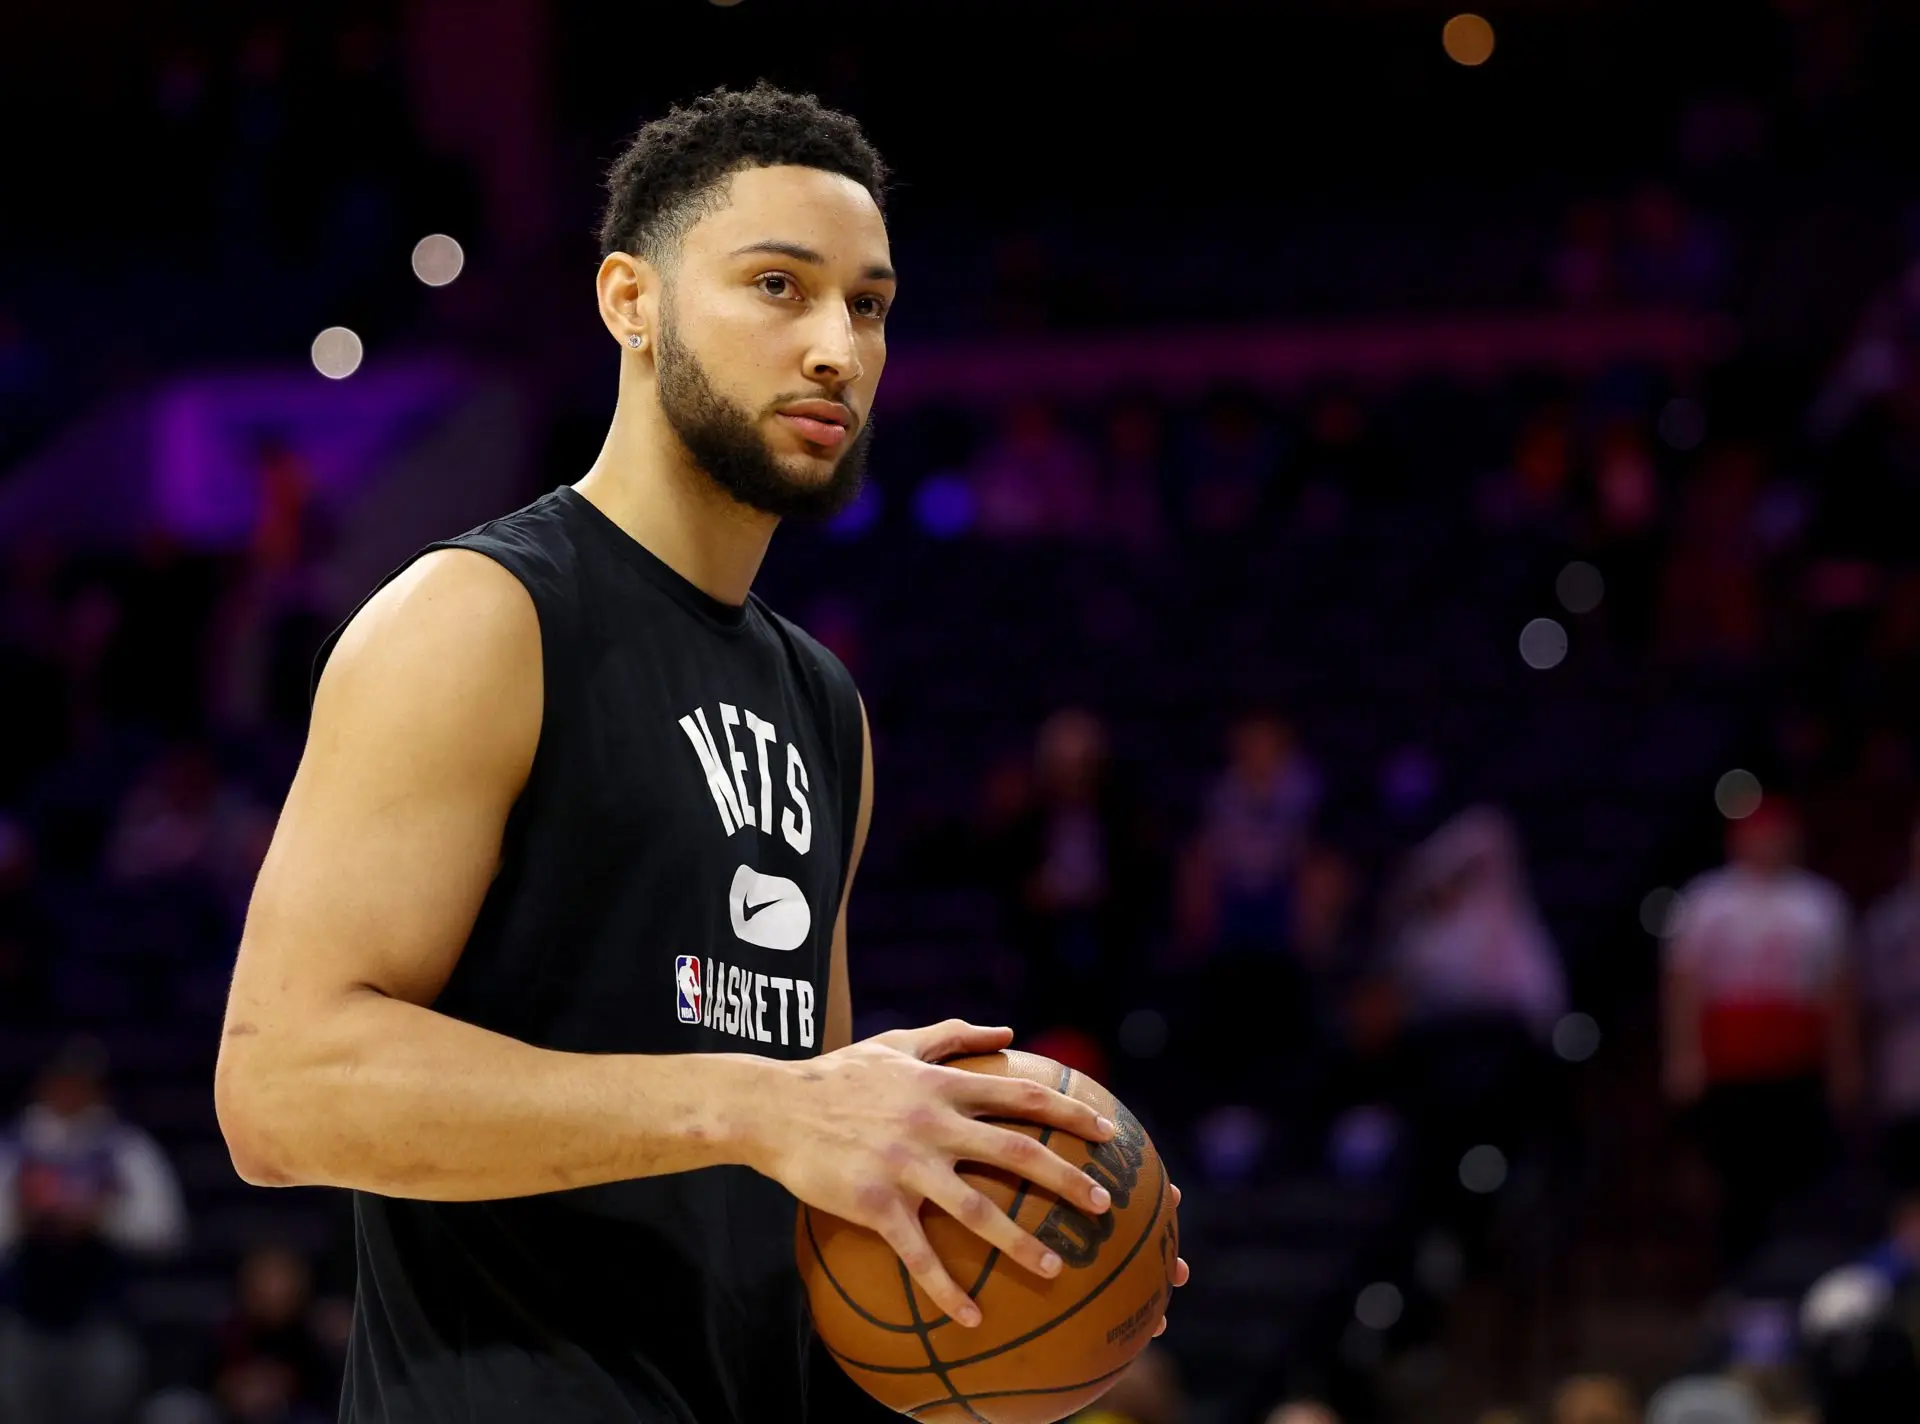 Ben Simmons wears very expensive Louis Vuitton sweater to Sixers game